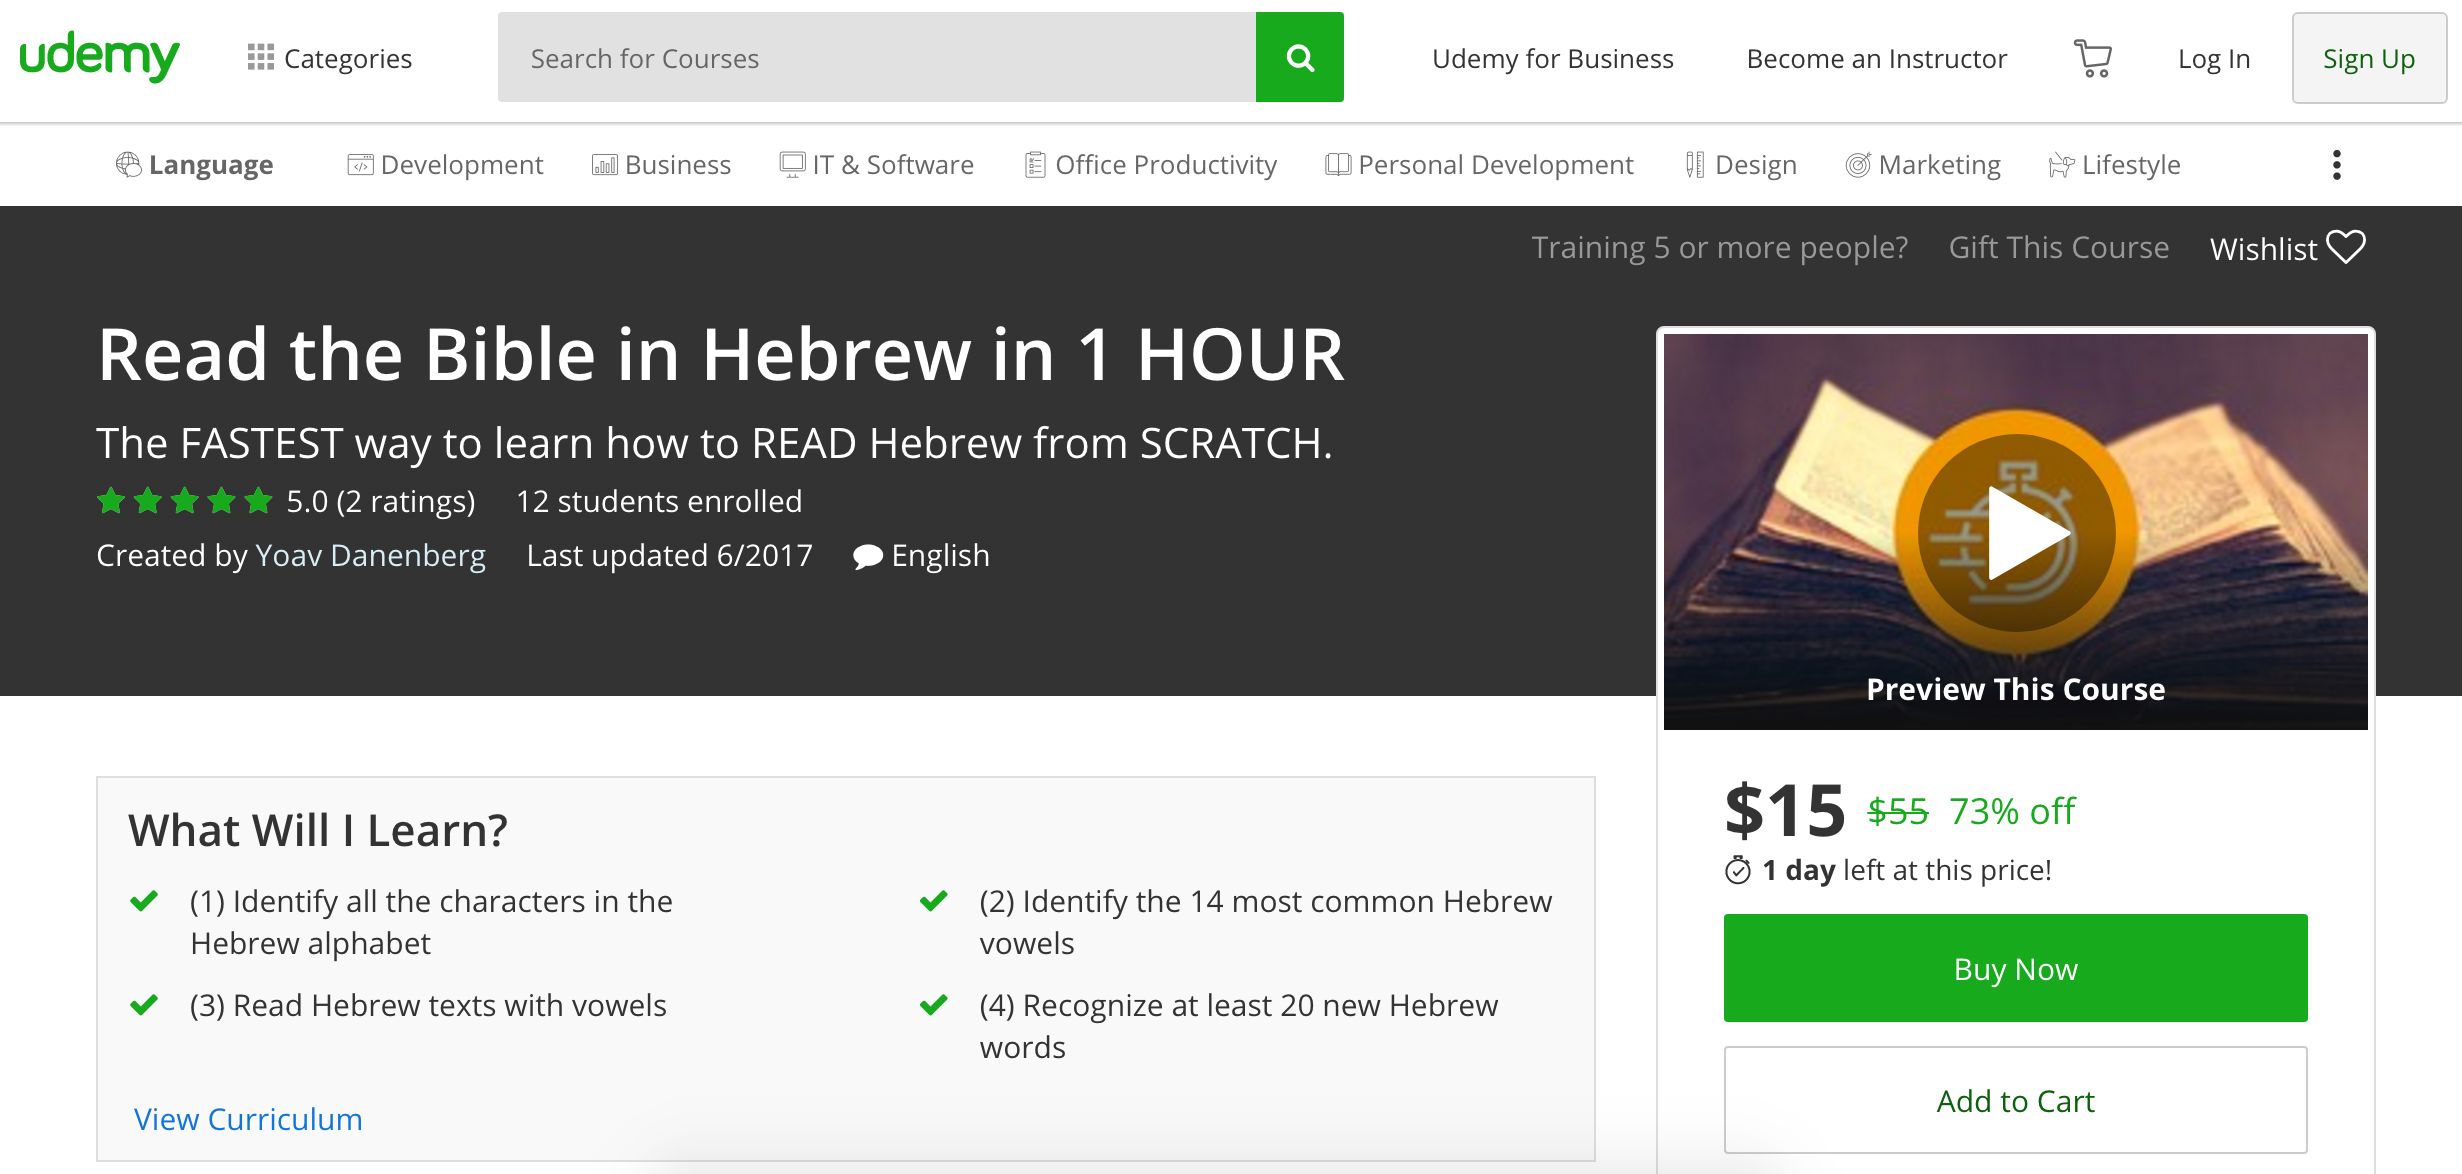 Screenshot showing a udemy course